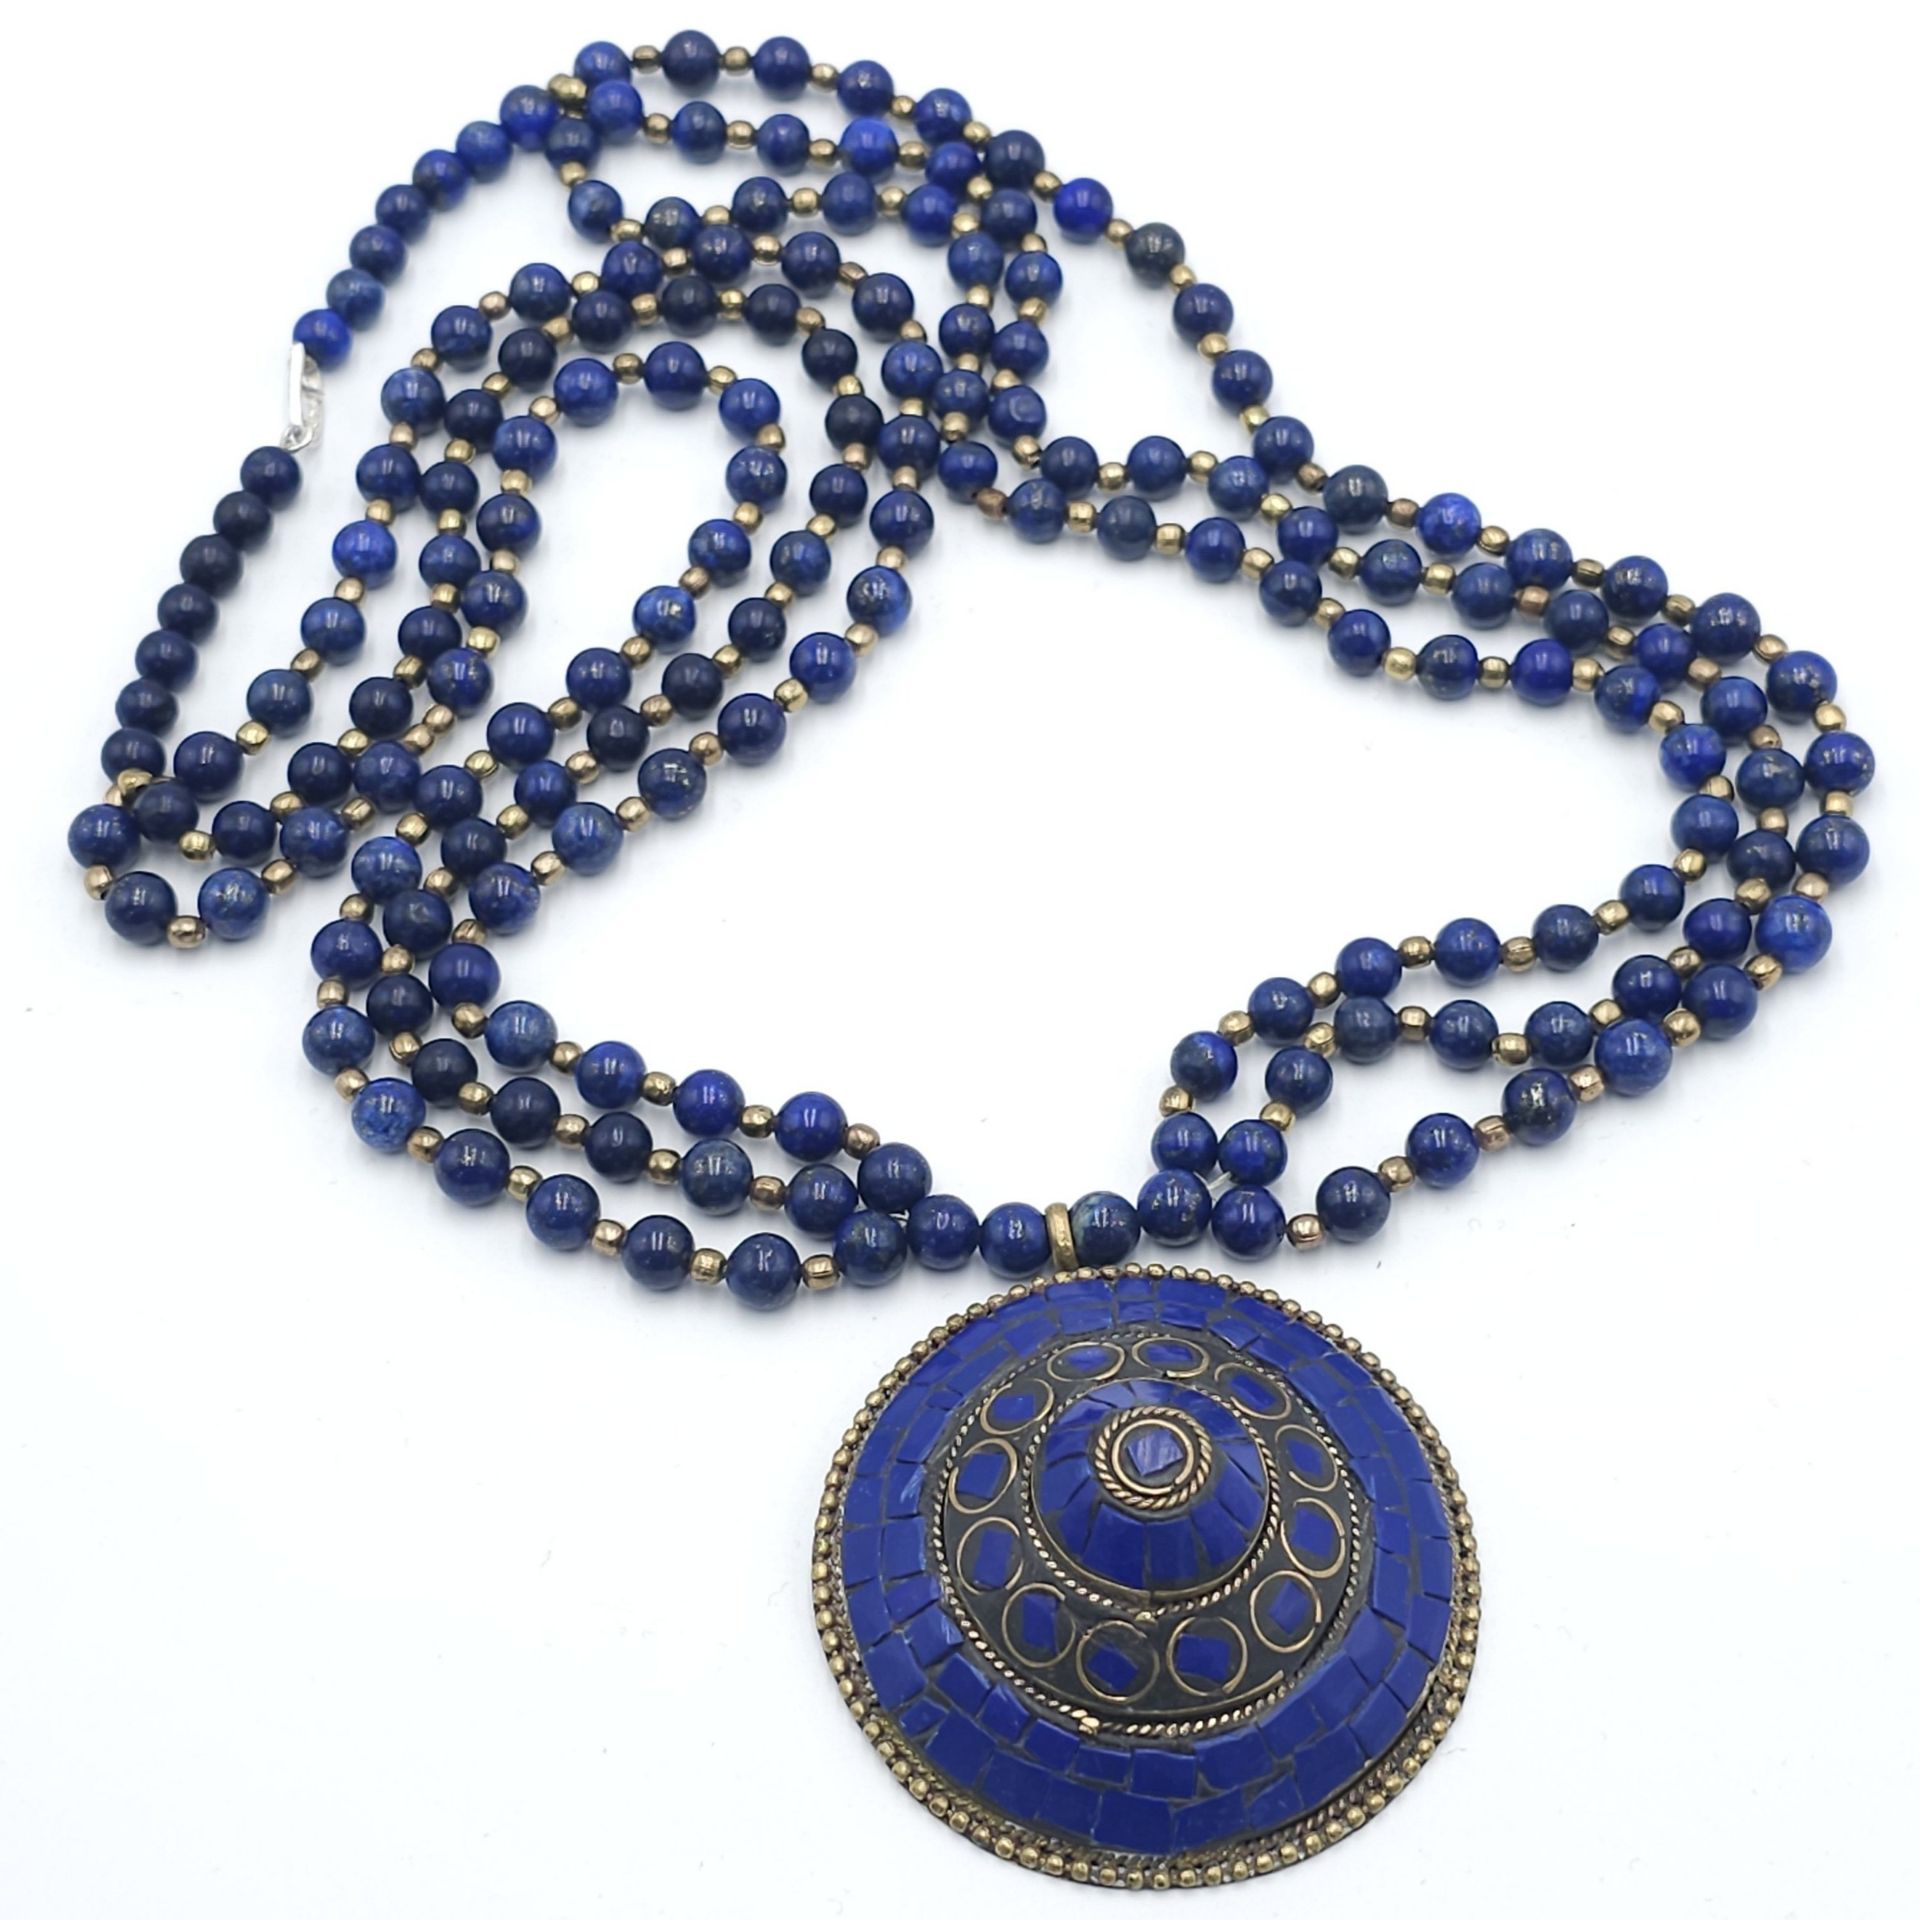 A Vintage Lapis Lazuli three strand necklace with large conical pendant. Also comes with a pair of - Image 6 of 11